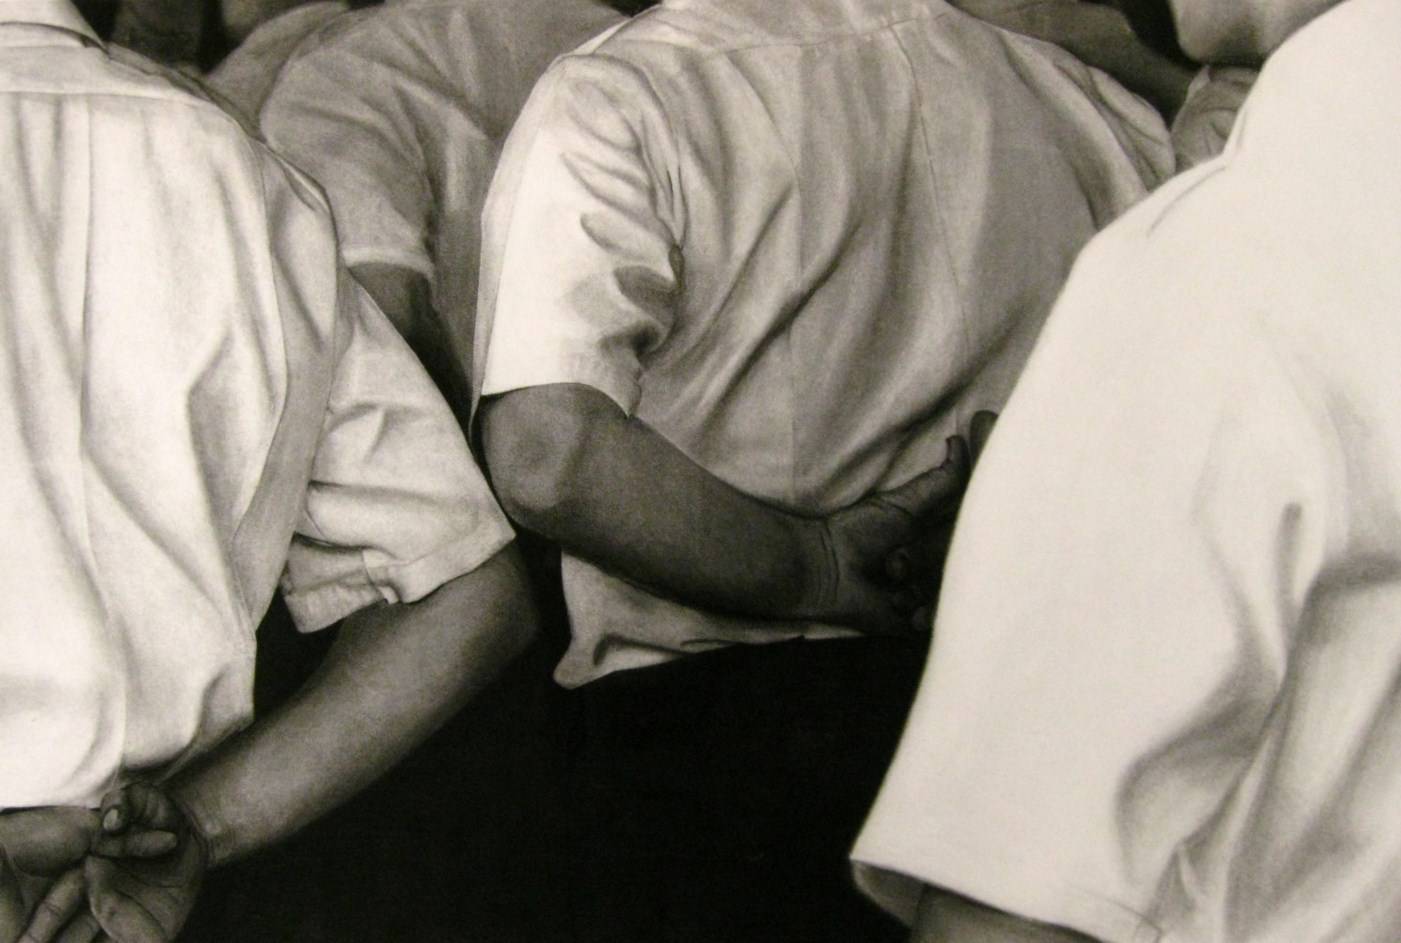 charcoal drawing of men's backs, wearing white short sleeved shirts